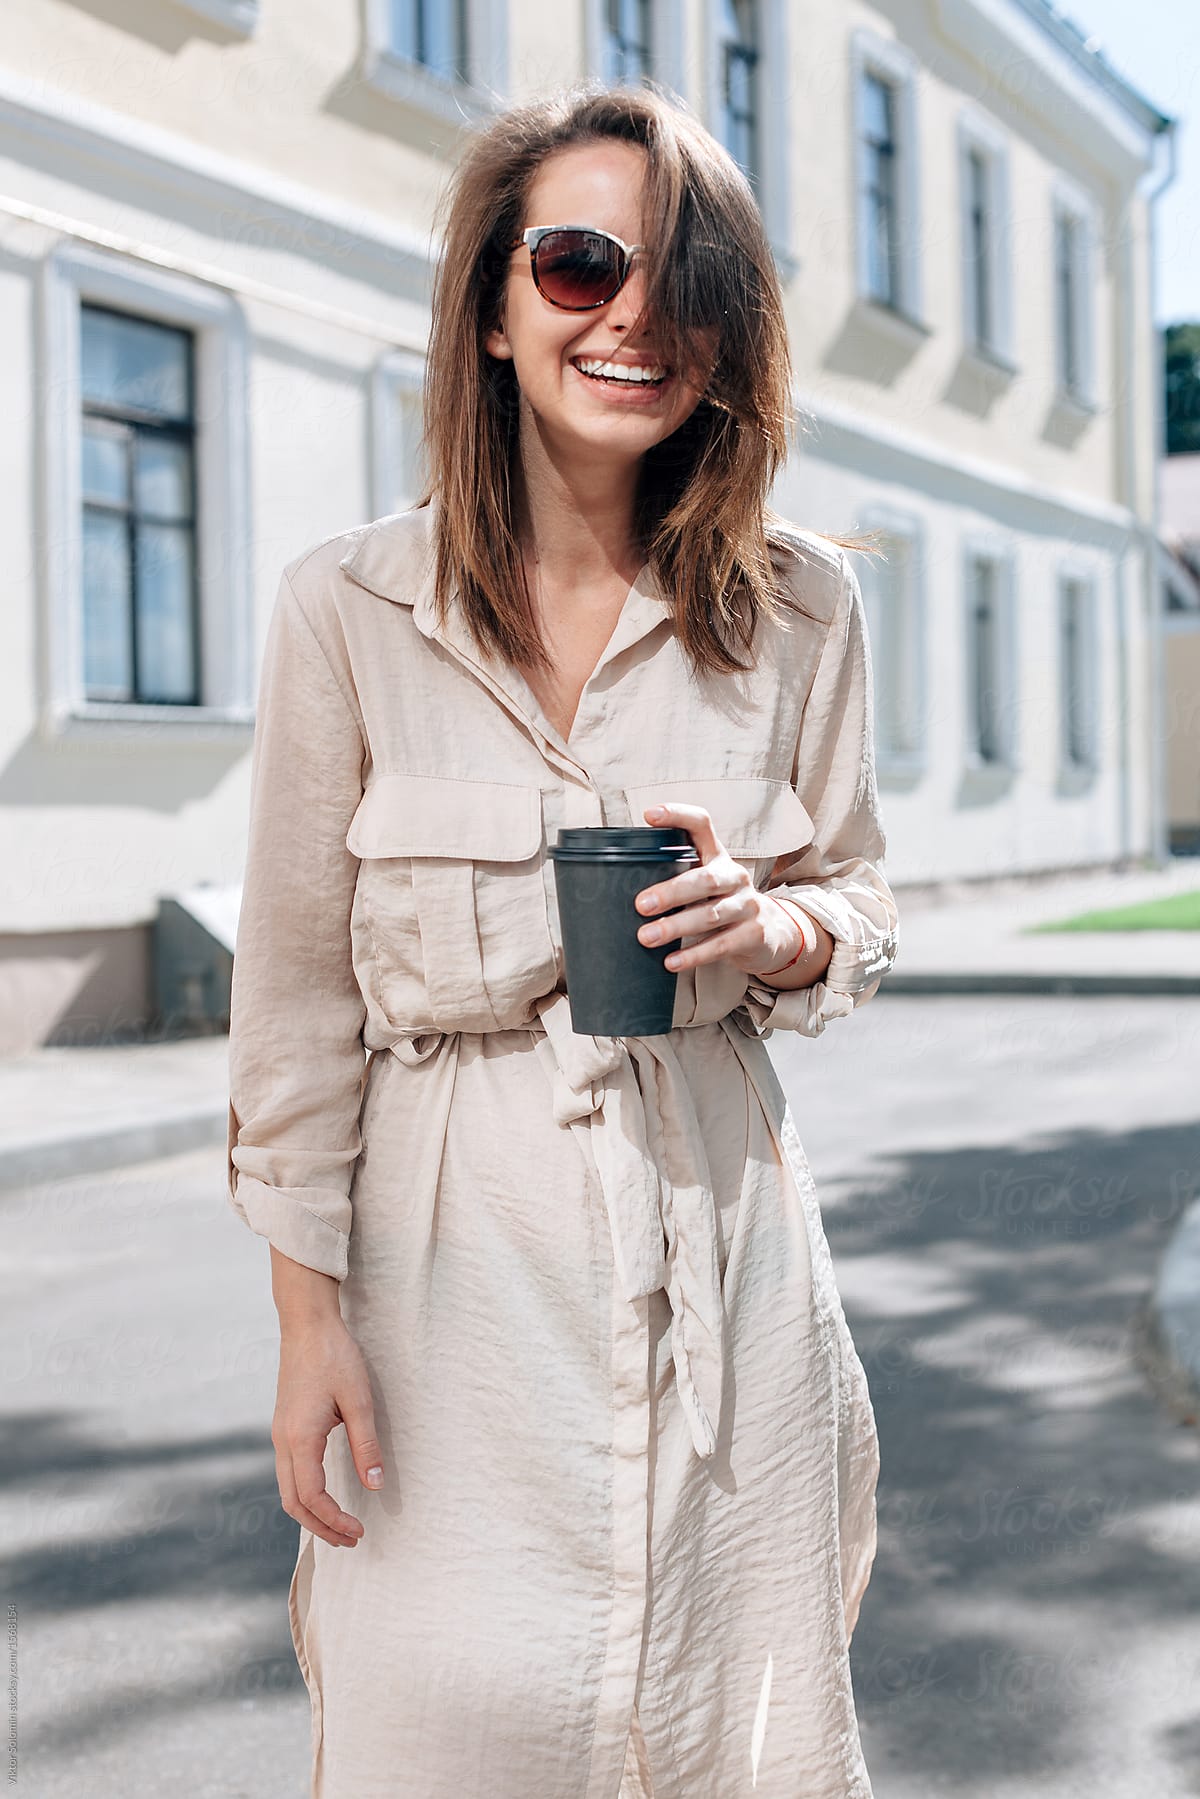 laughing woman cup coffee hands standing street